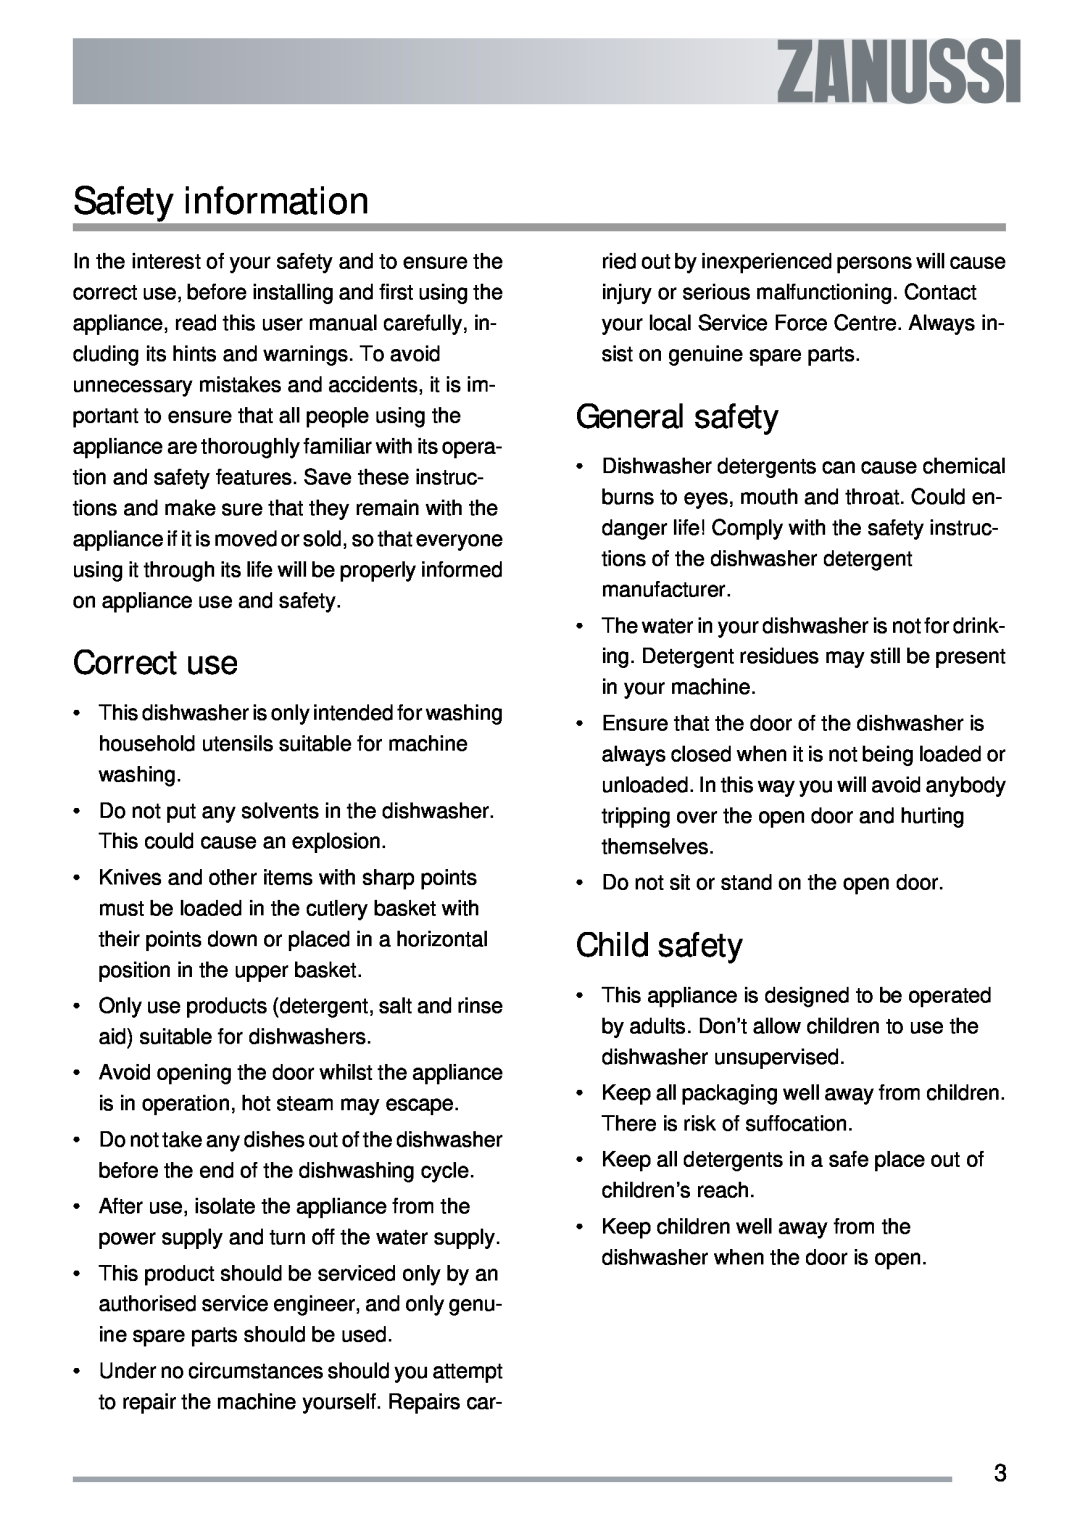 Zanussi ZDT 311 user manual Safety information, Correct use, General safety, Child safety 